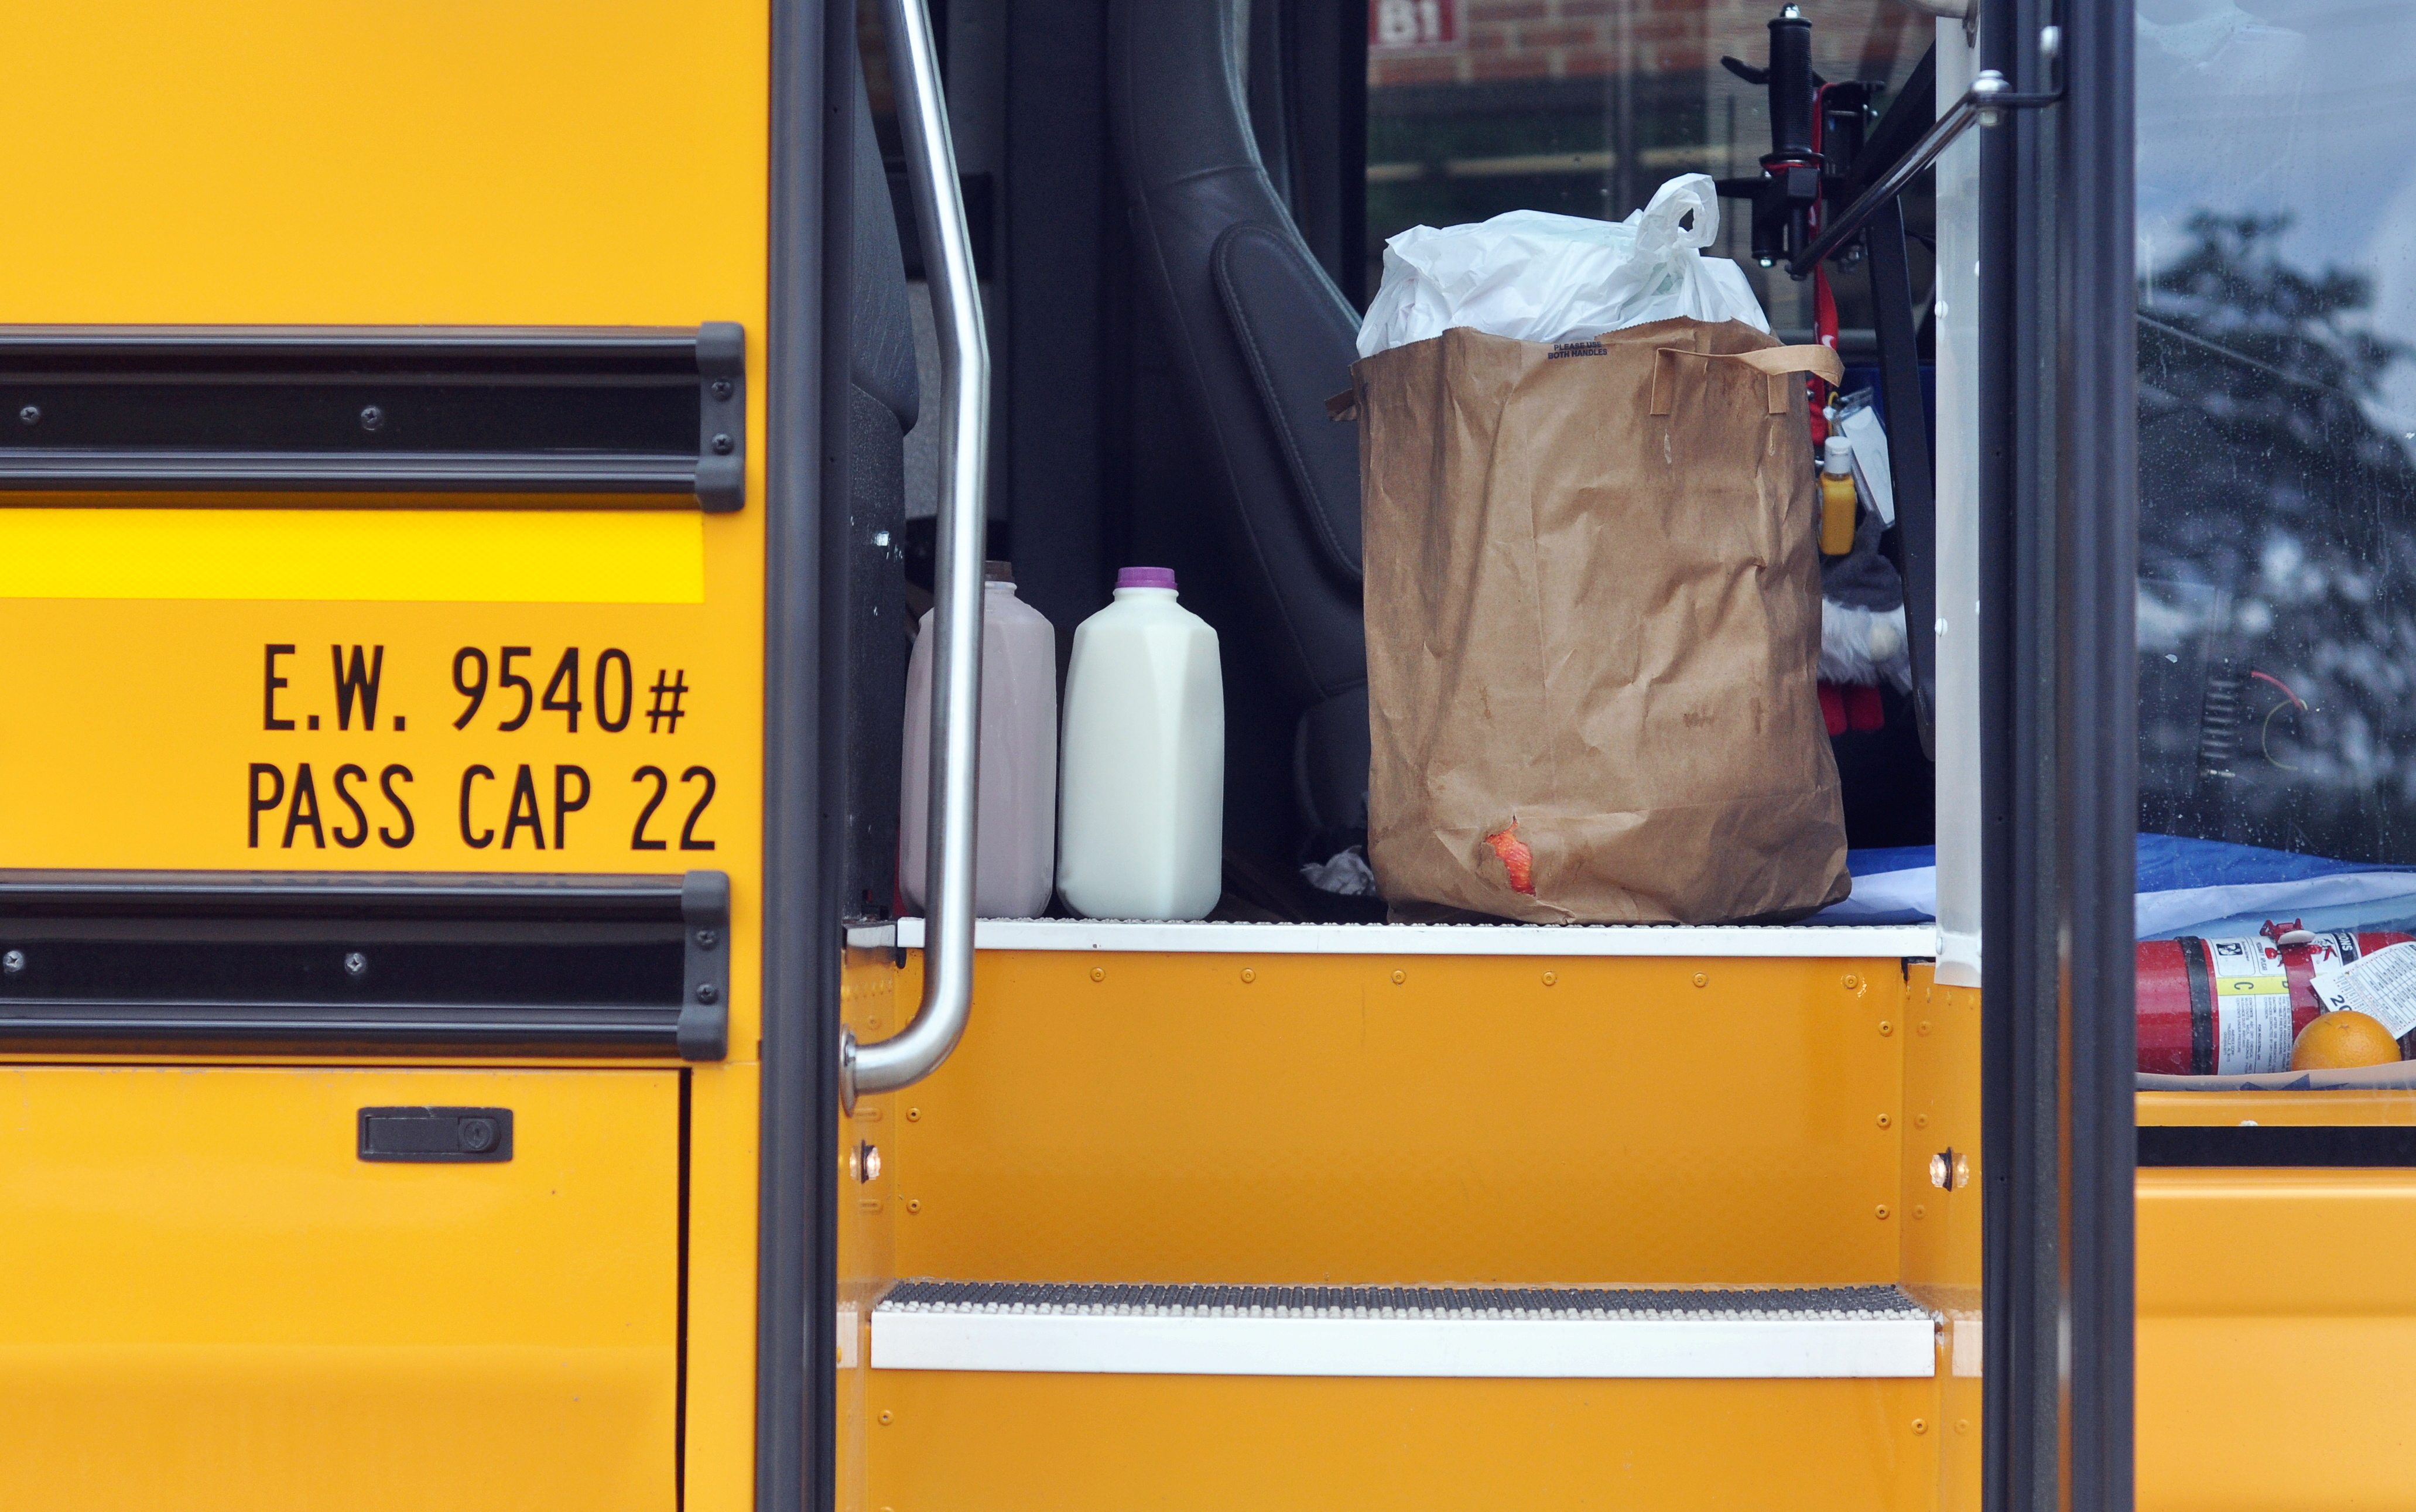 Expanded U.S. school lunch programs may be lasting pandemic legacy